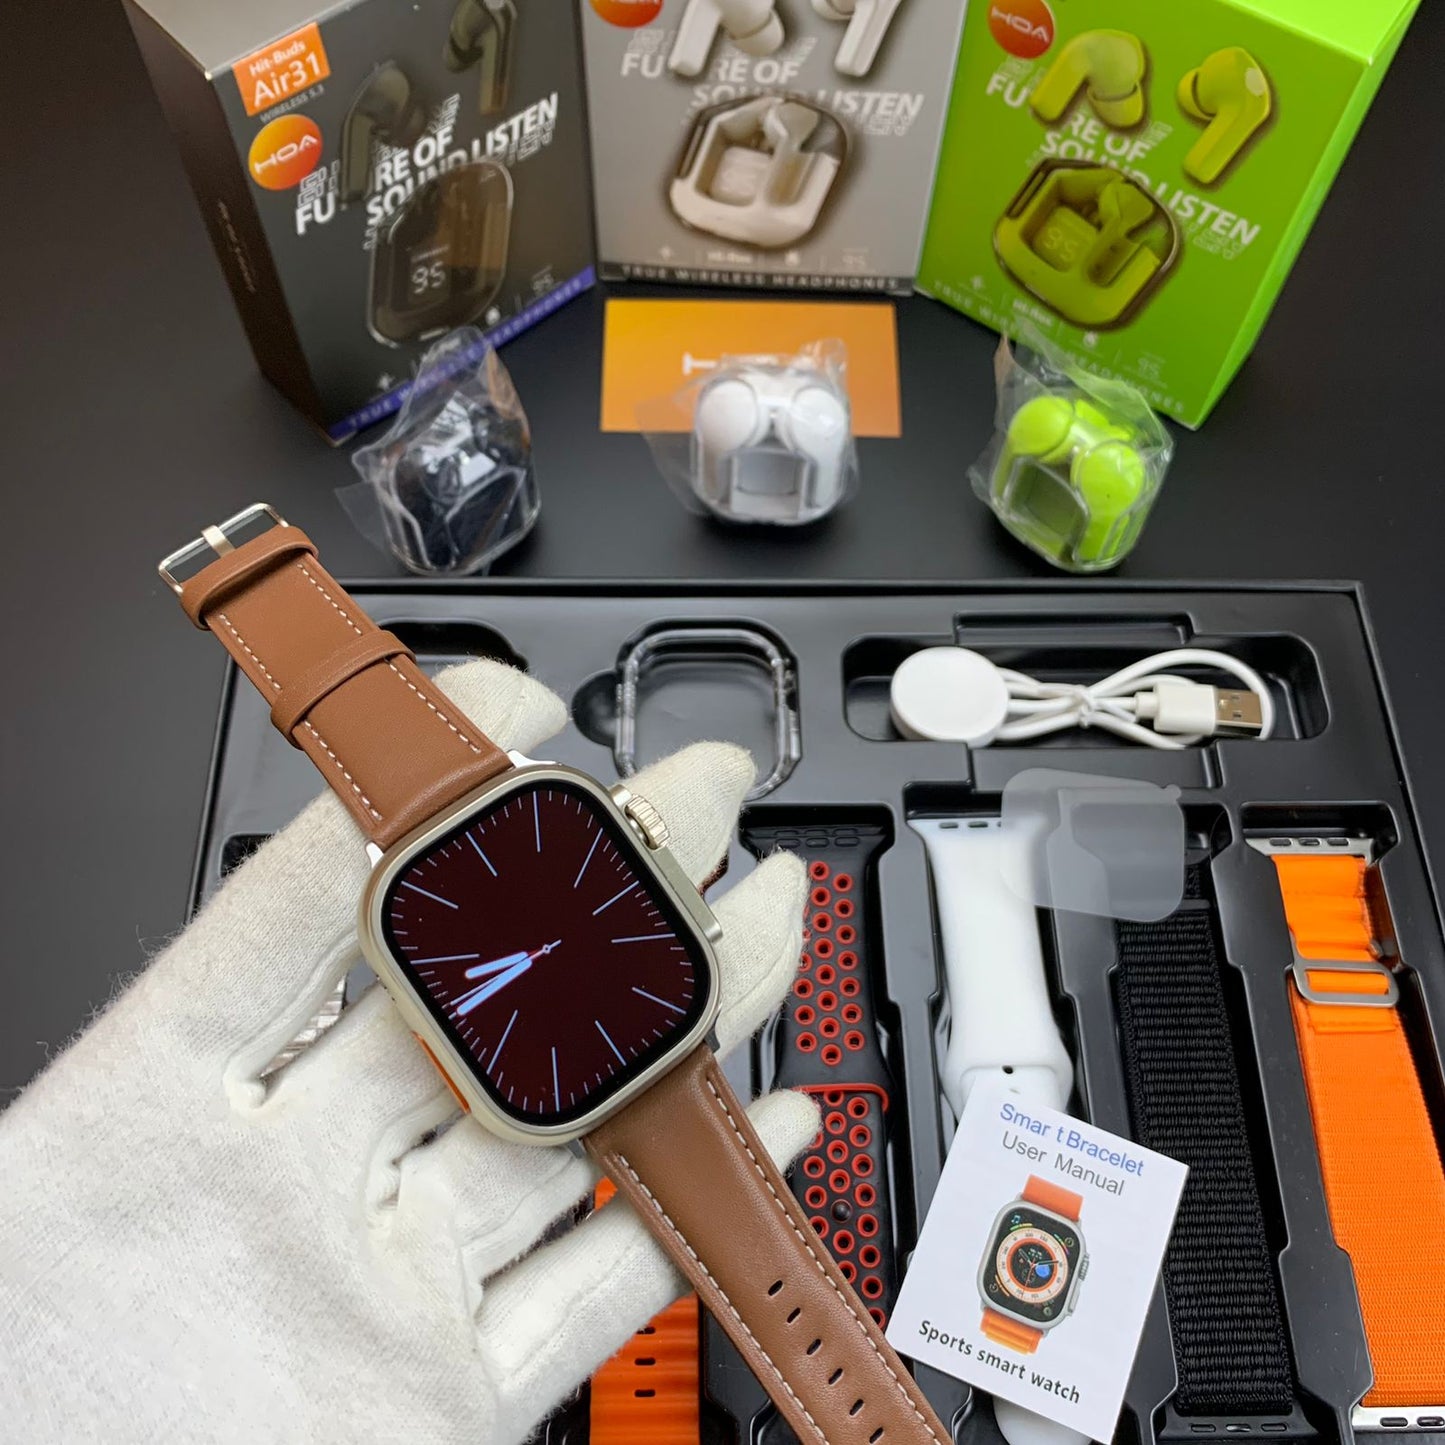 DT900 ULTRA SMARTWATCH WITH FREE AIR31 AIRPODS